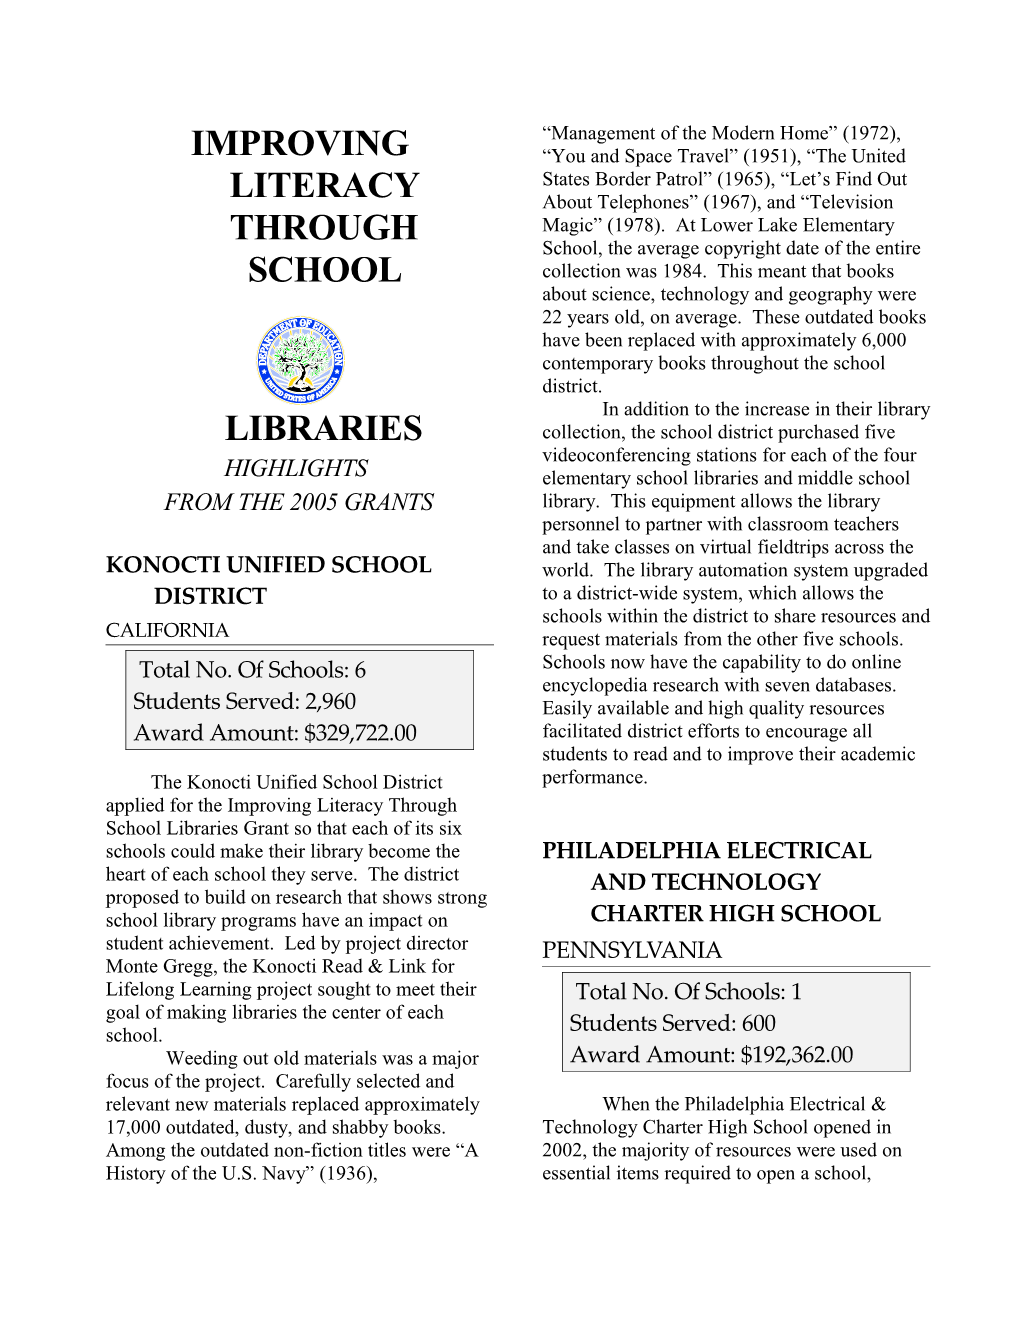 Highlights from the 2005 Improving Literacy Through School Libraries Grants (MS WORD)